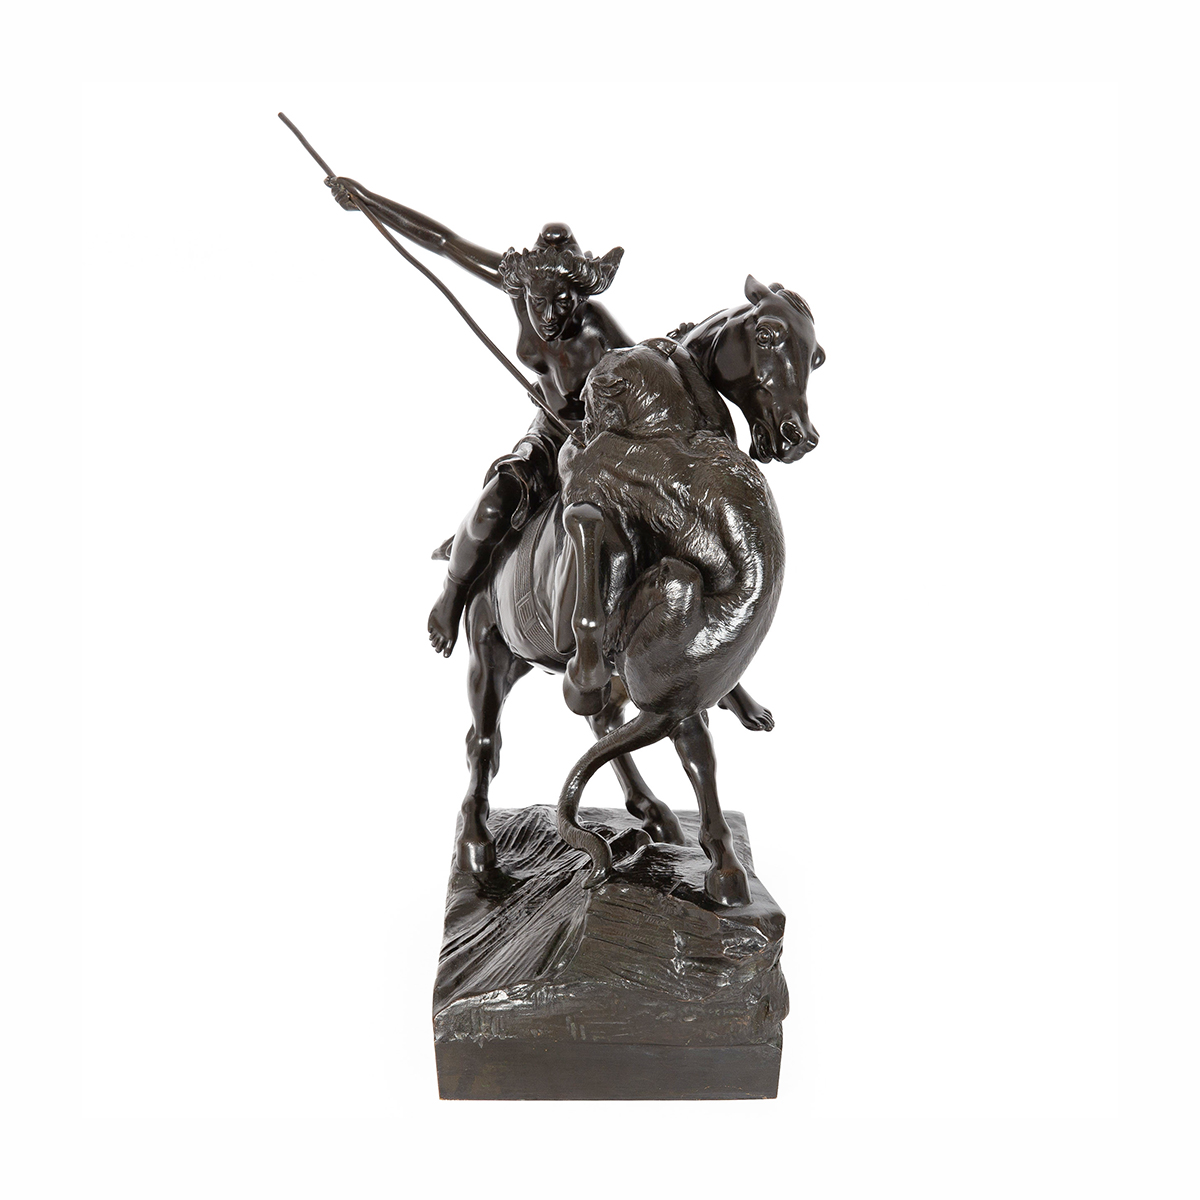 Statue Of Warrior on Horse